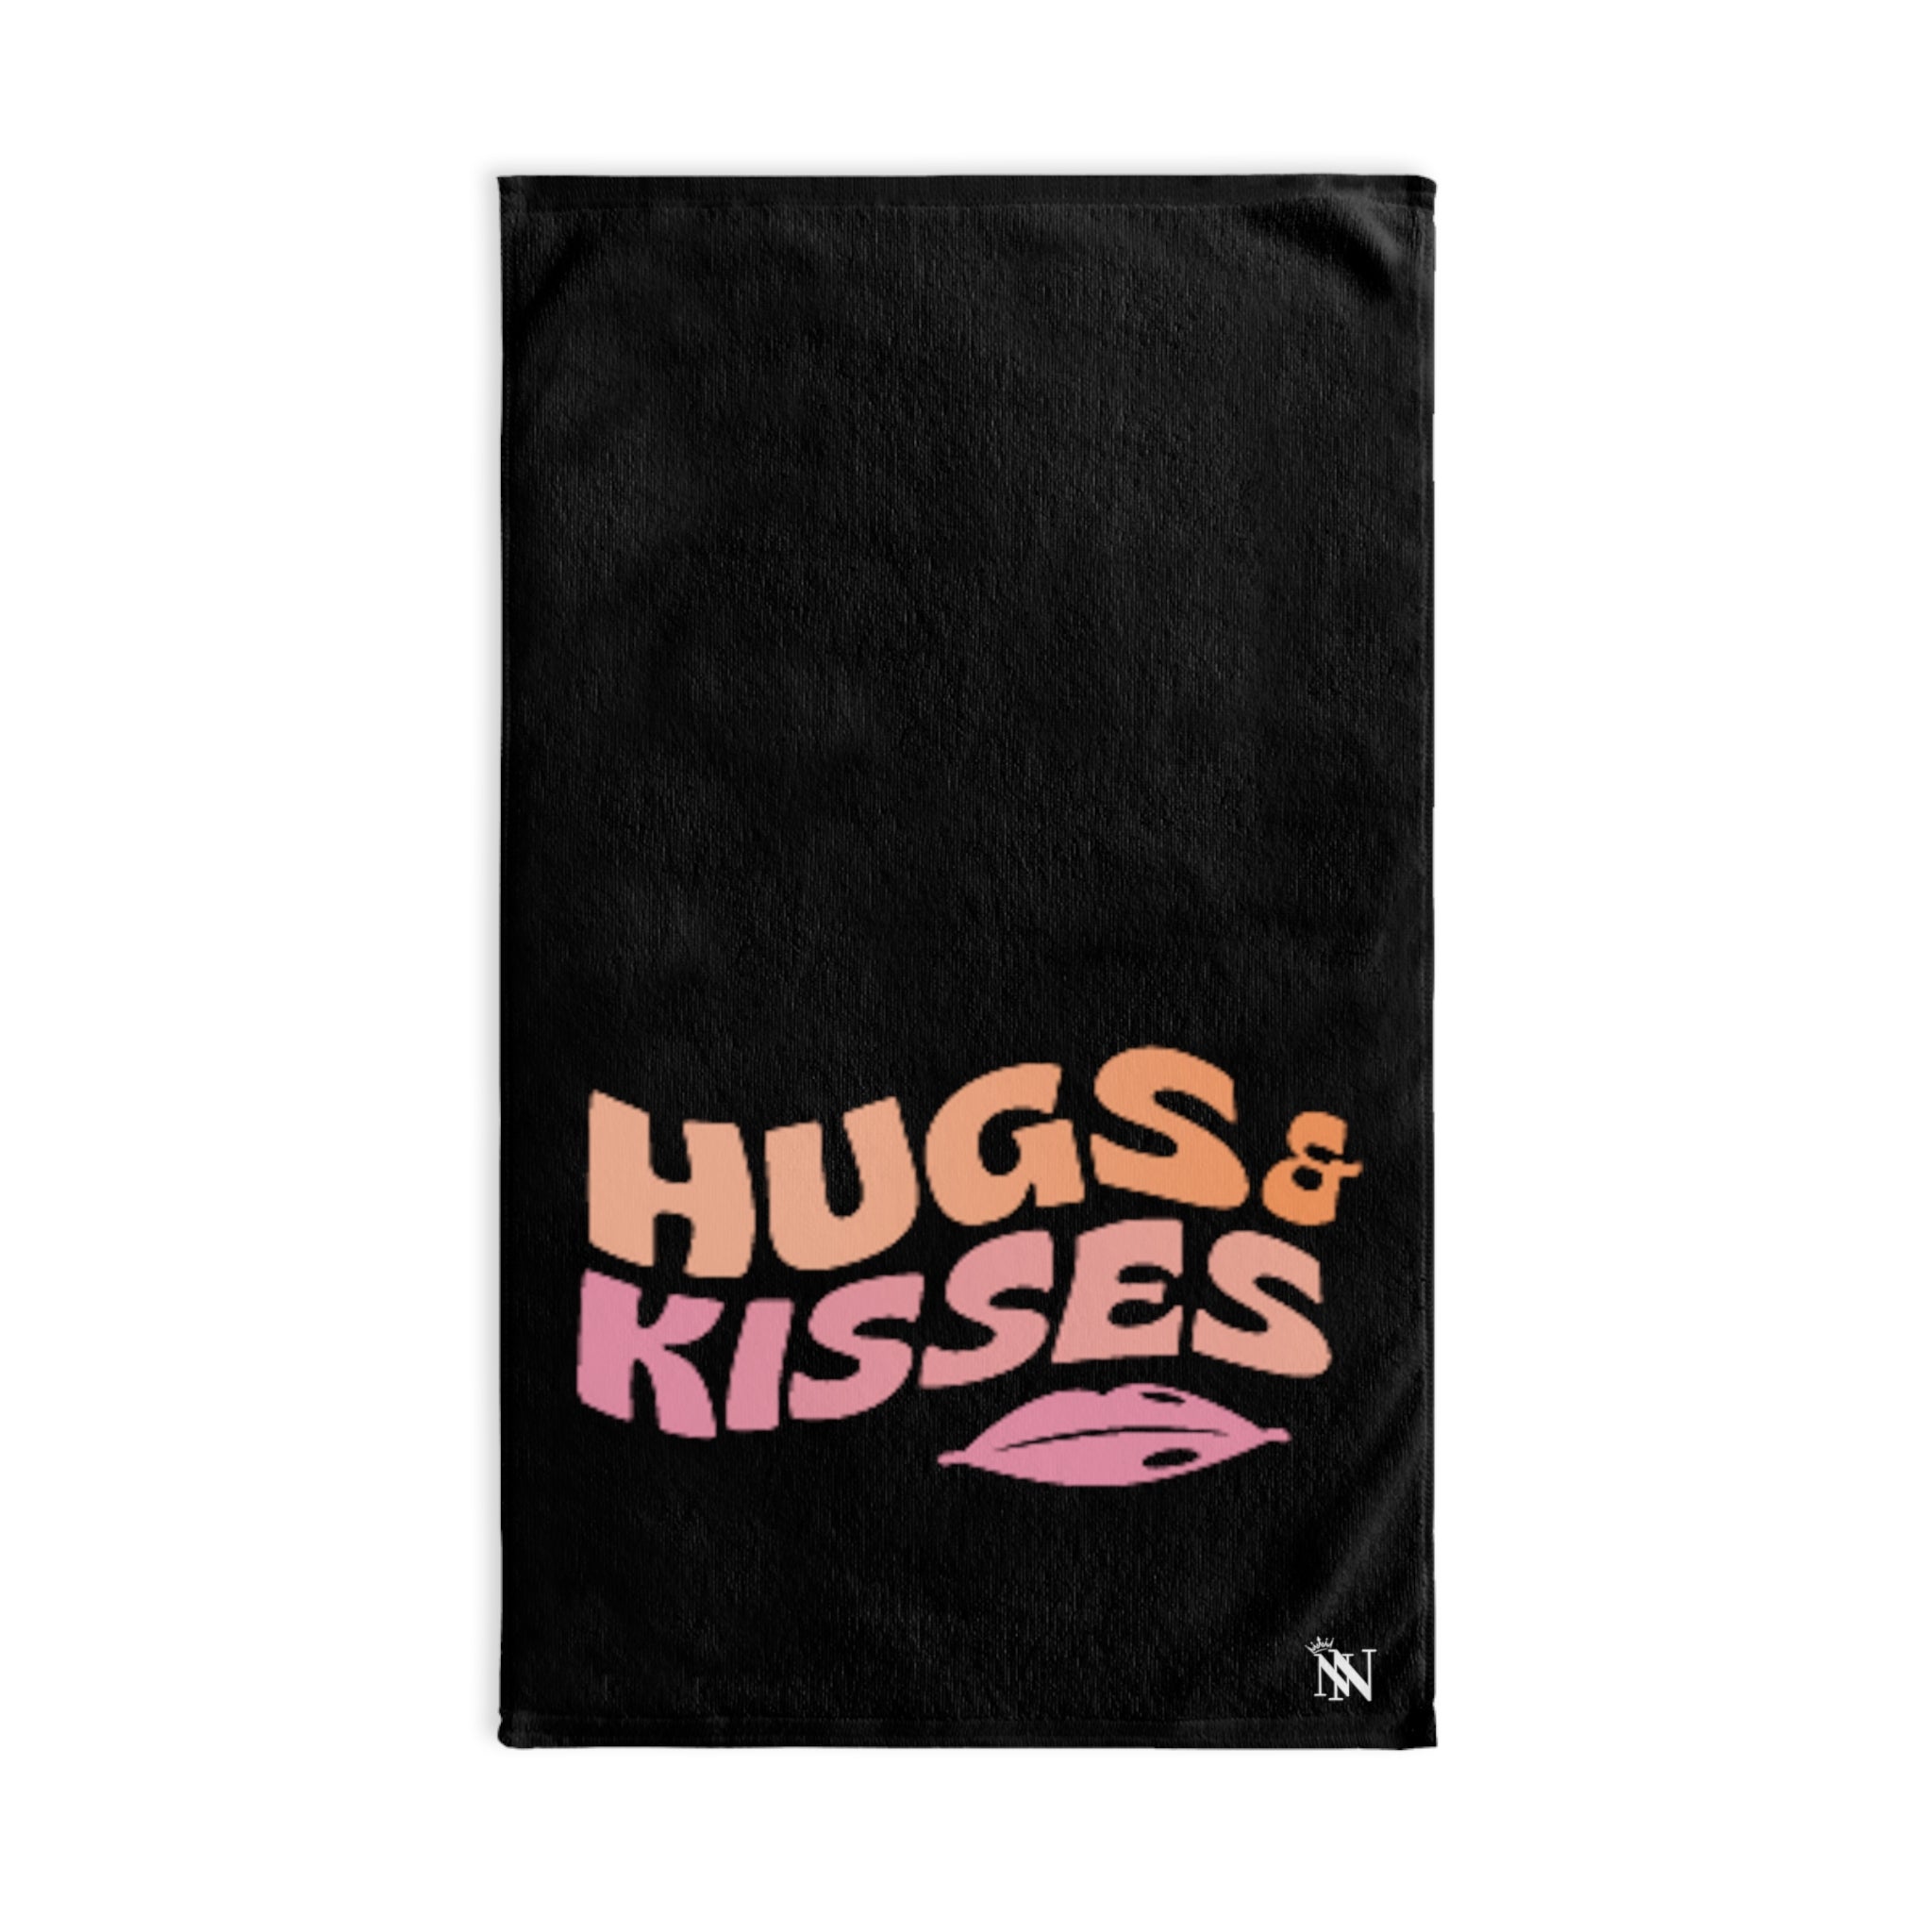 Hugs Kisses Kiss Black | Sexy Gifts for Boyfriend, Funny Towel Romantic Gift for Wedding Couple Fiance First Year 2nd Anniversary Valentines, Party Gag Gifts, Joke Humor Cloth for Husband Men BF NECTAR NAPKINS